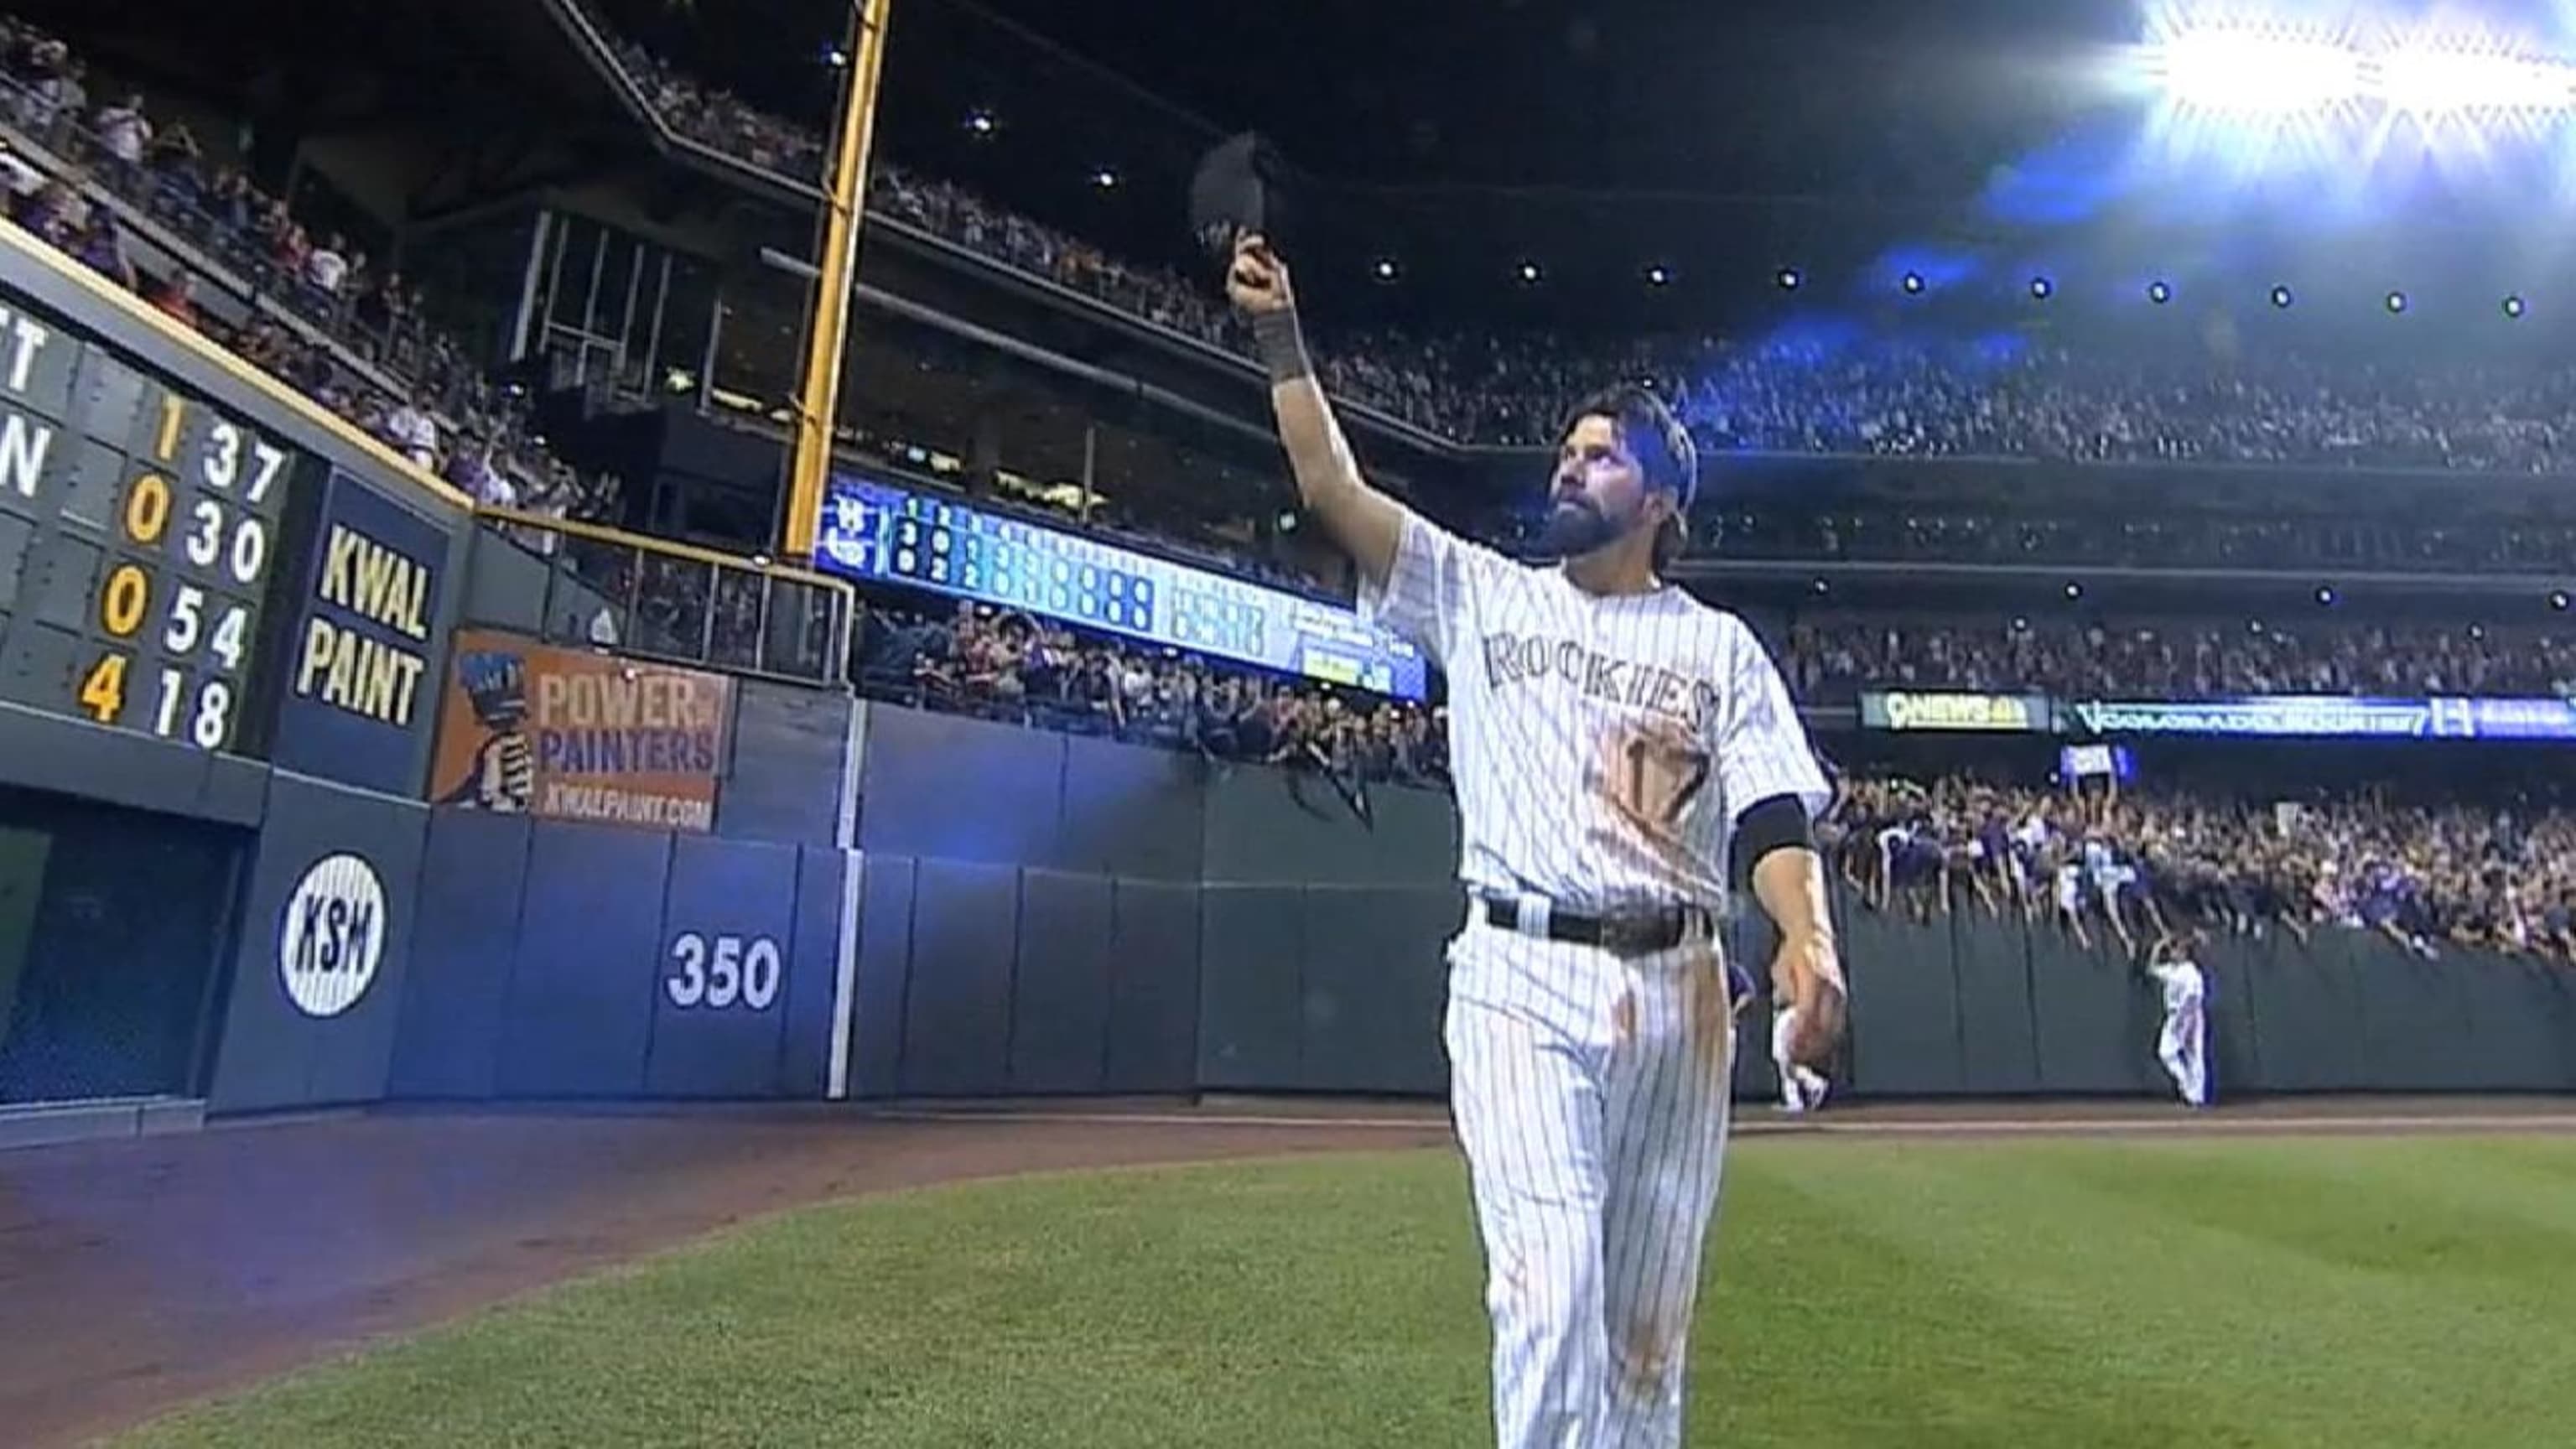 Todd Helton Denied MLB Hall of Fame Spot For Second Consecutive